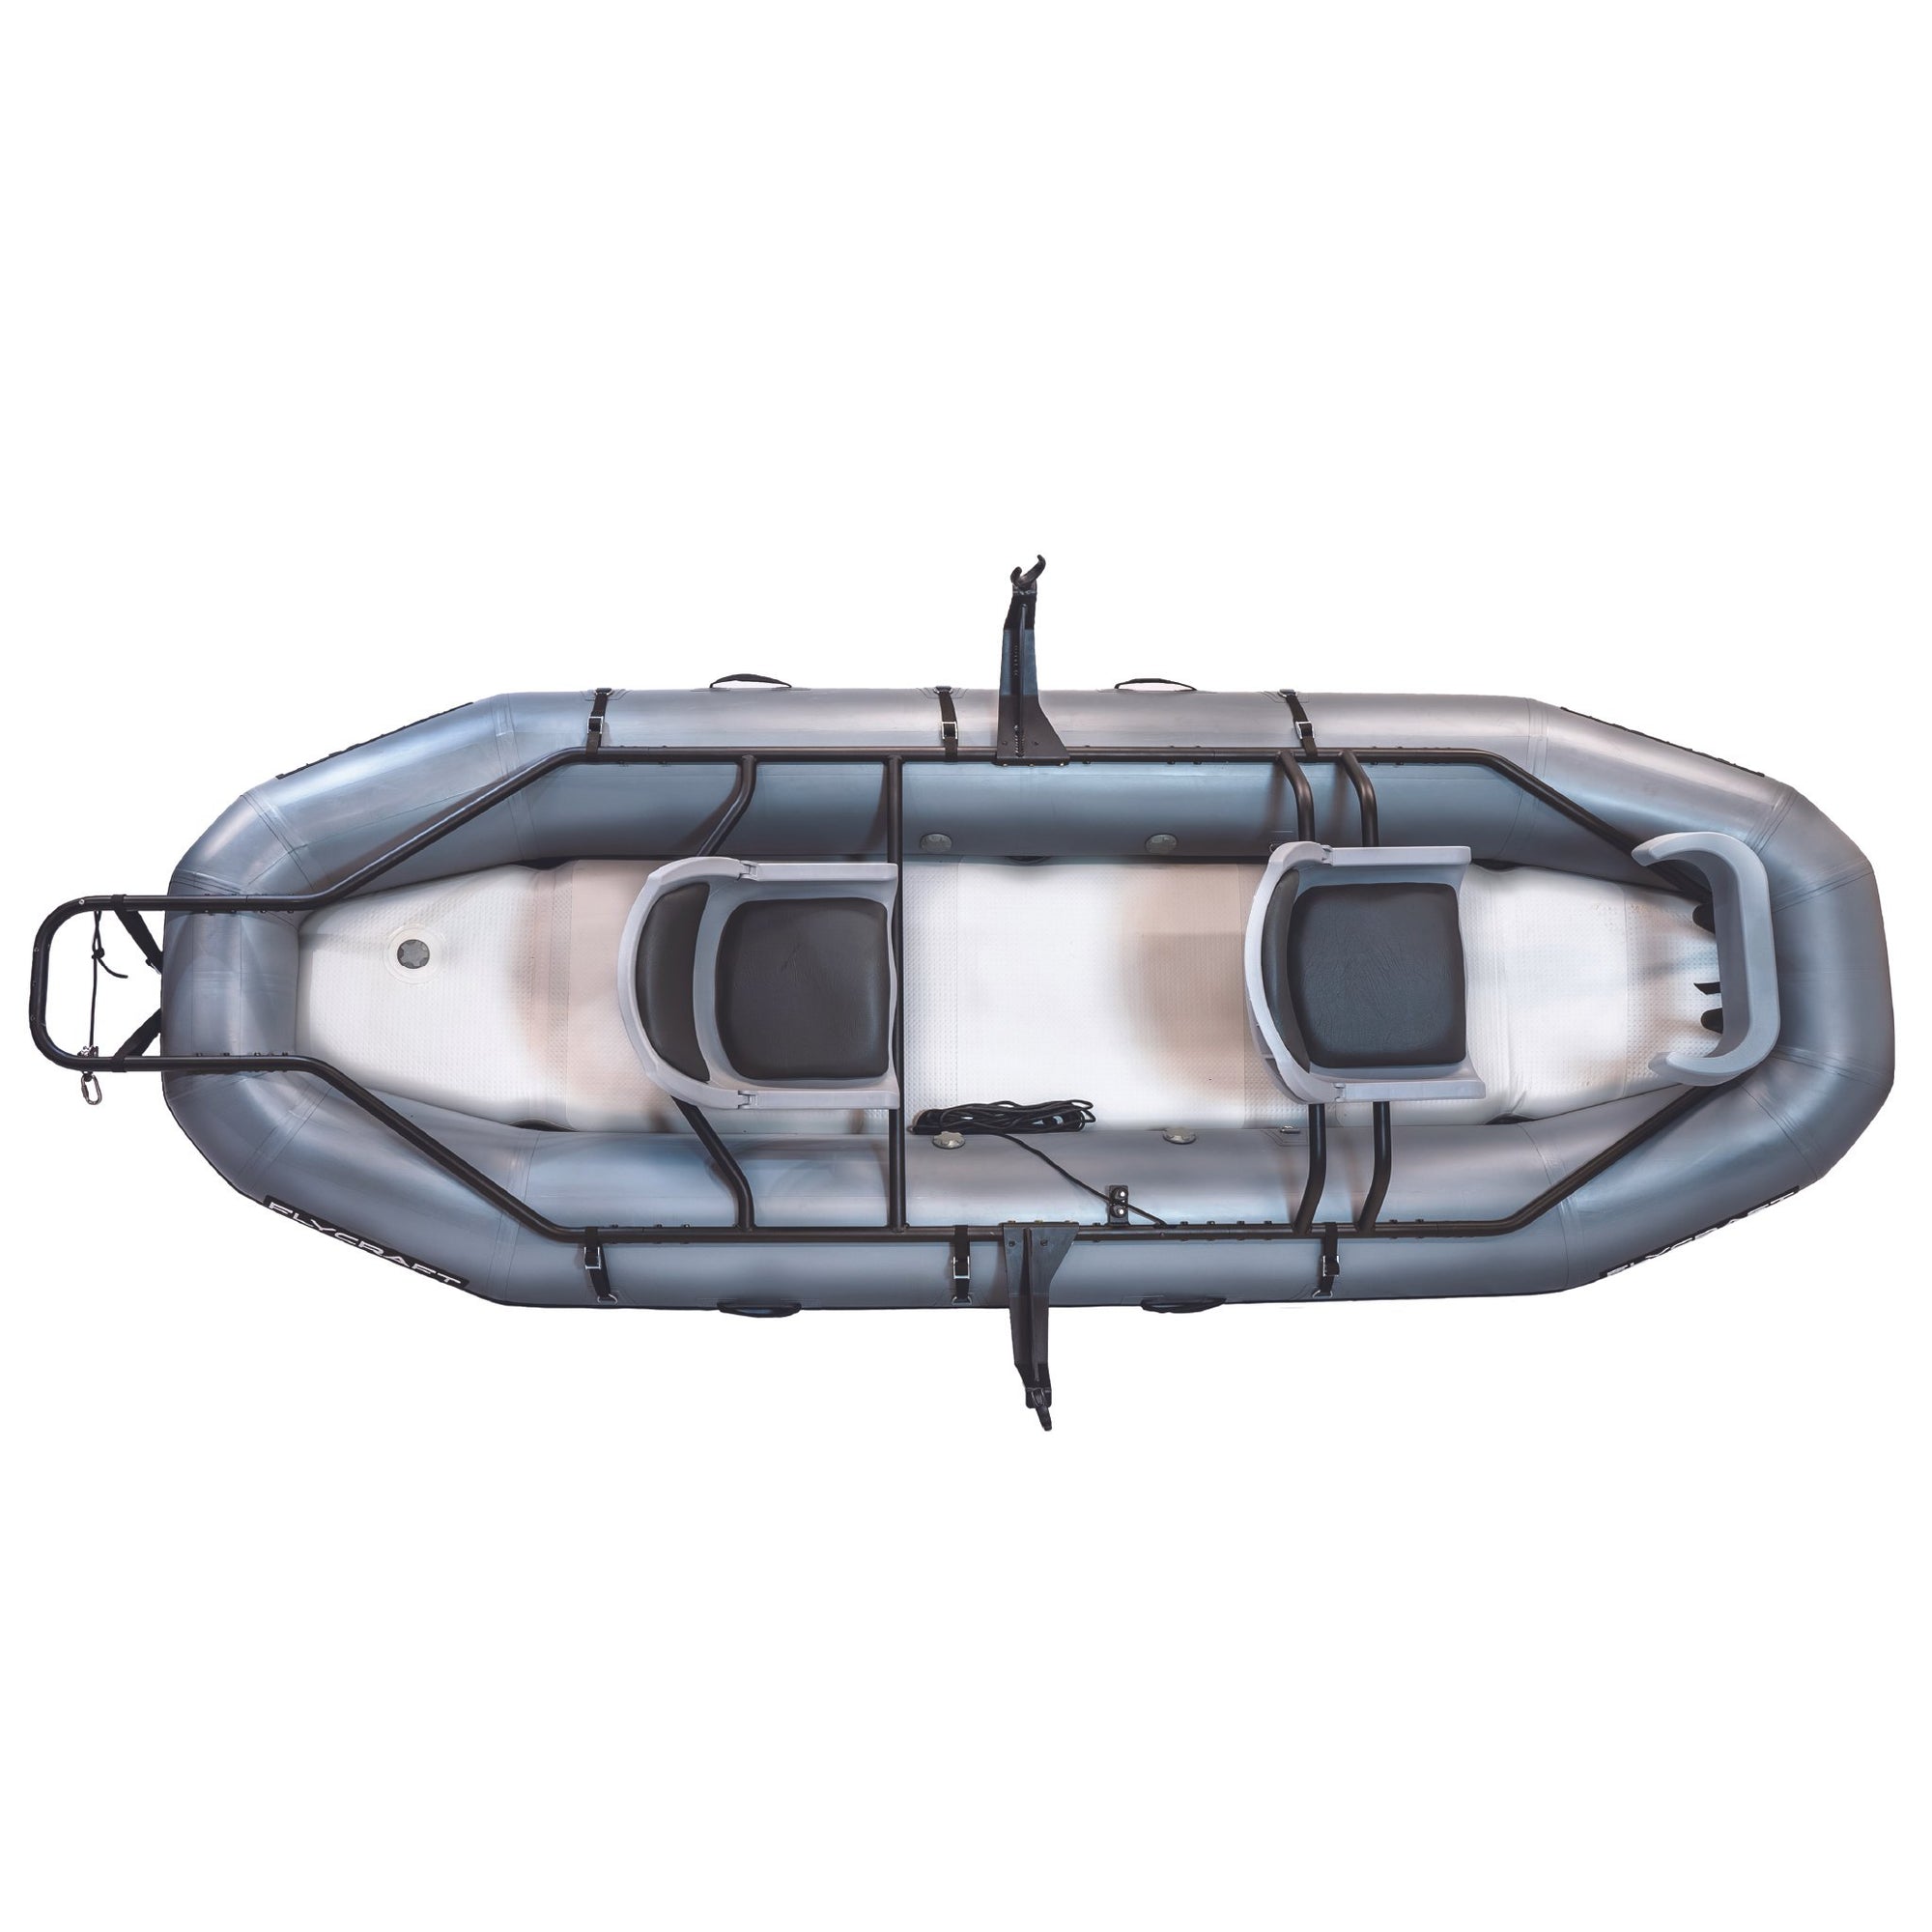 Which Flycraft fishing boat is best for you? - Flycraft